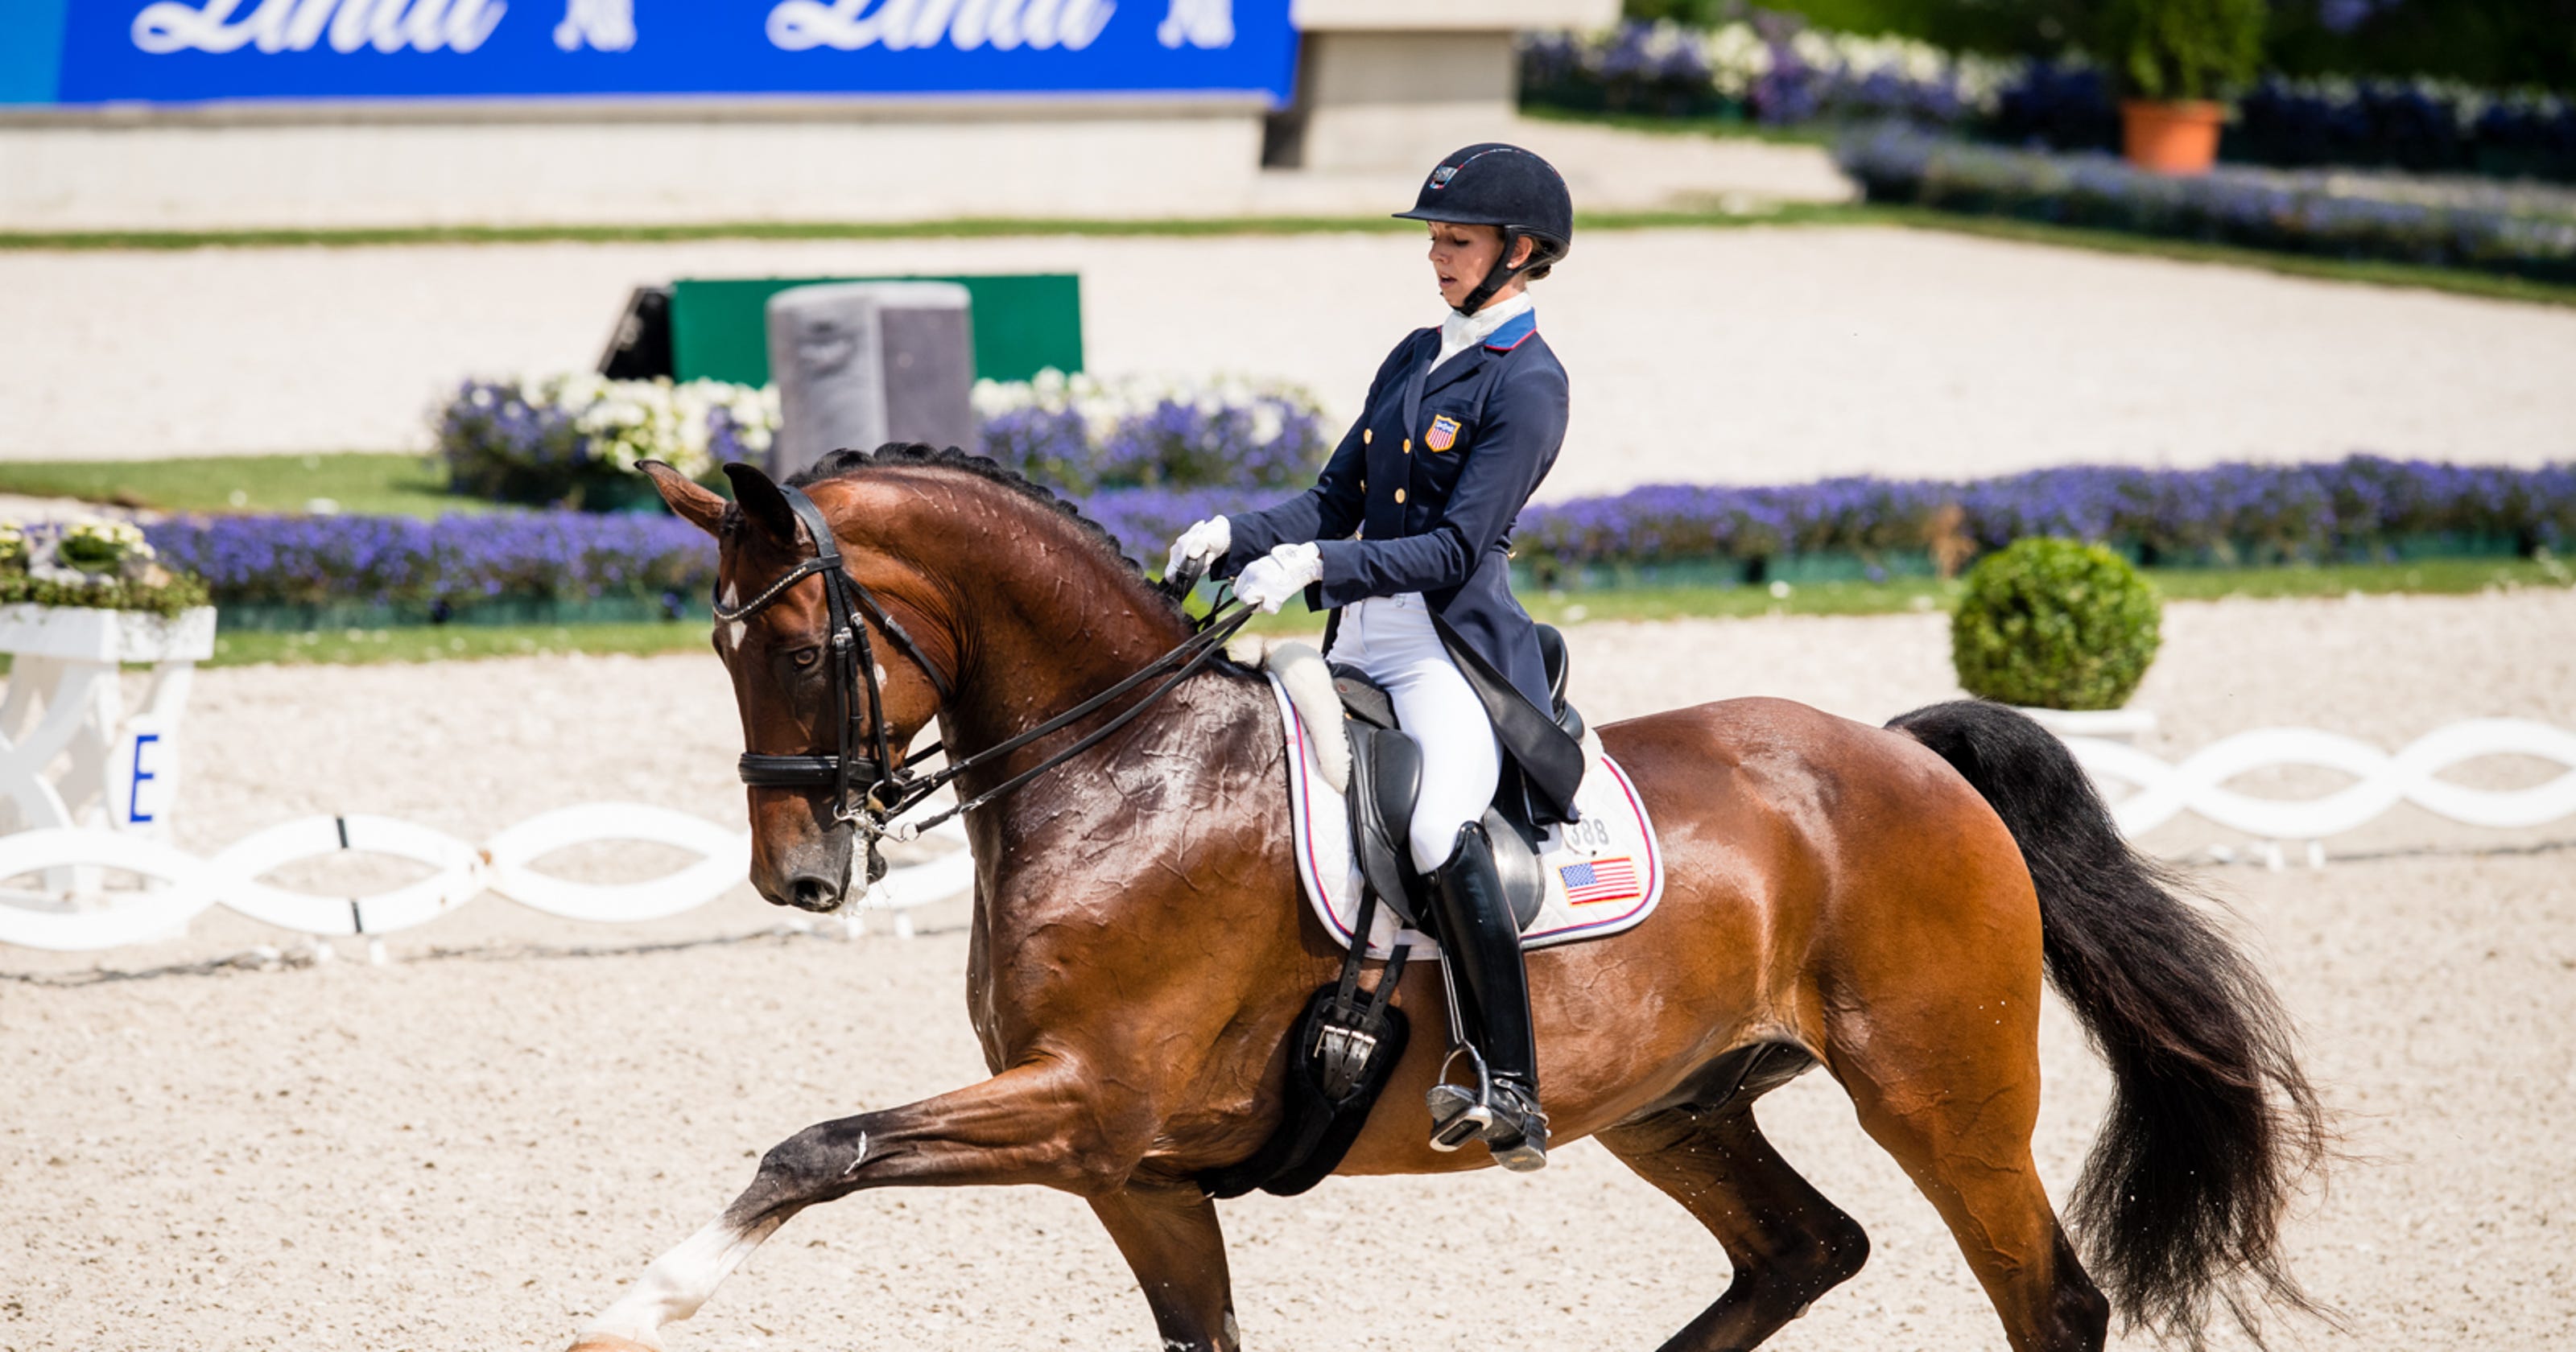 World Equestrian Games 2018 How To Watch On Tv Stream Online